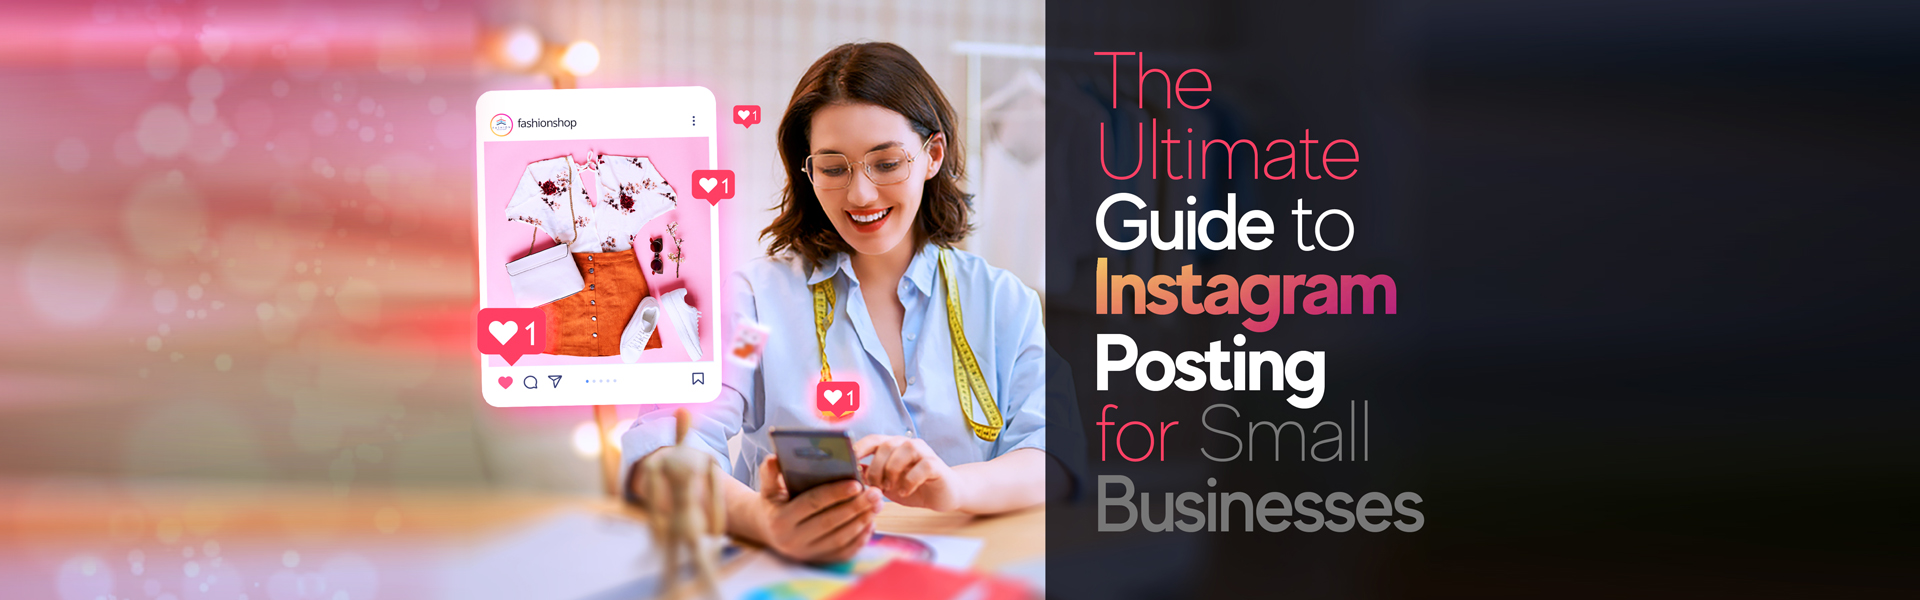 Ultimate Guide to Instagram Posting